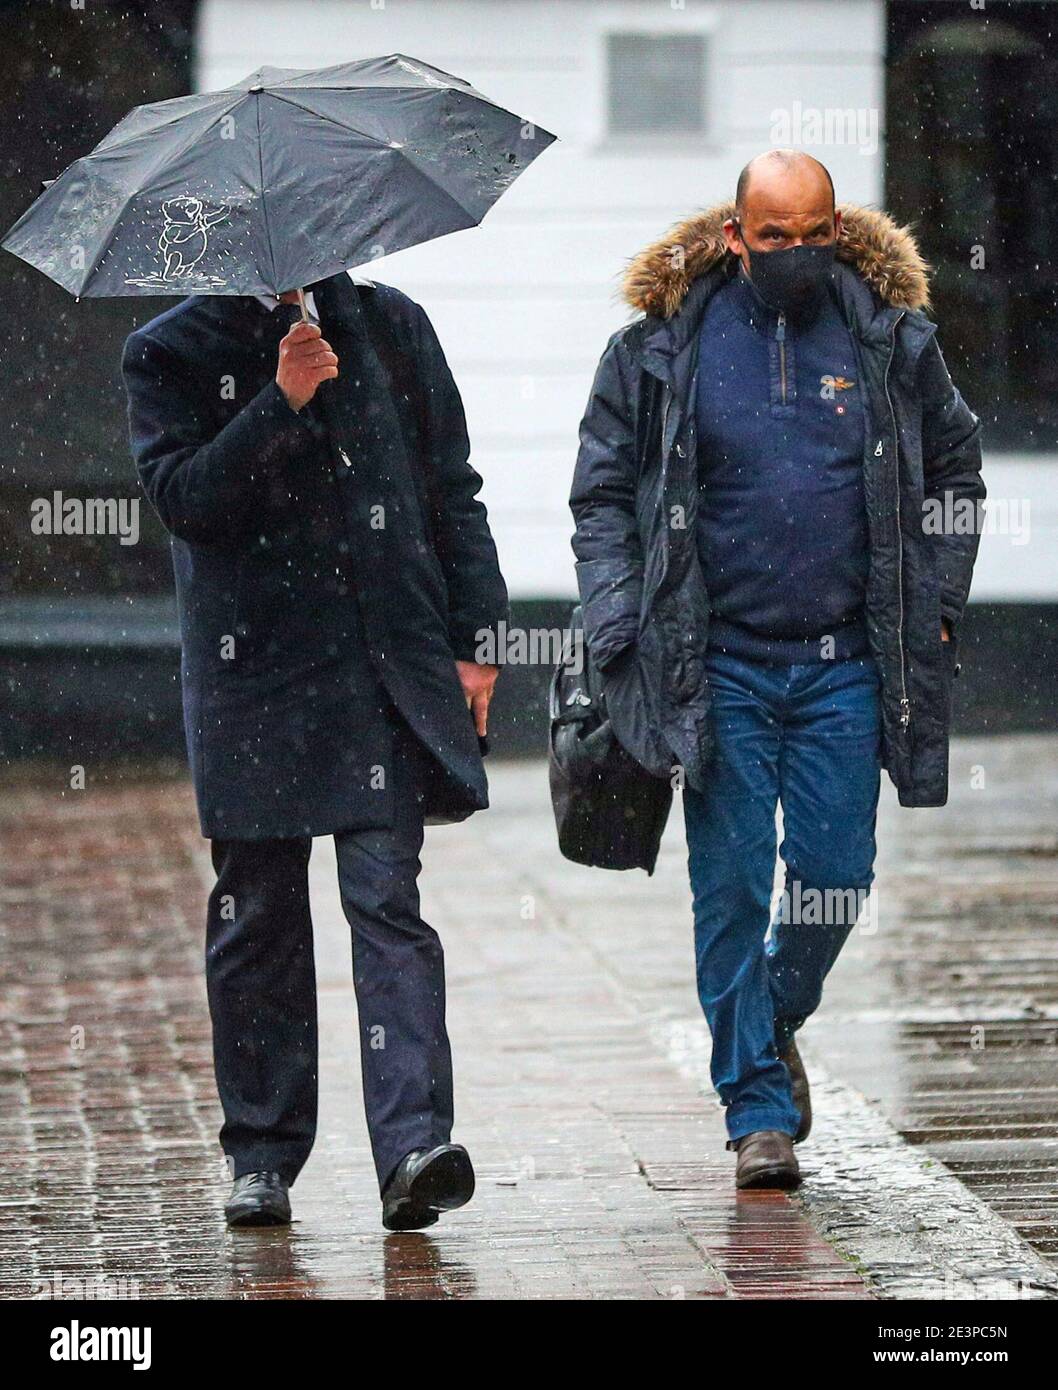 Philip Smith (right), 58, a company manager of Wood Flour Mill in Bosley arrives at Chester Town Hall to stand trial on health and safety charges, along with colleagues, after the death of four employees in an explosion at the mill on July 17 2015. Mill owner George Boden is charged with four counts of gross negligence manslaughter. Picture date: Wednesday January 20, 2021. Stock Photo